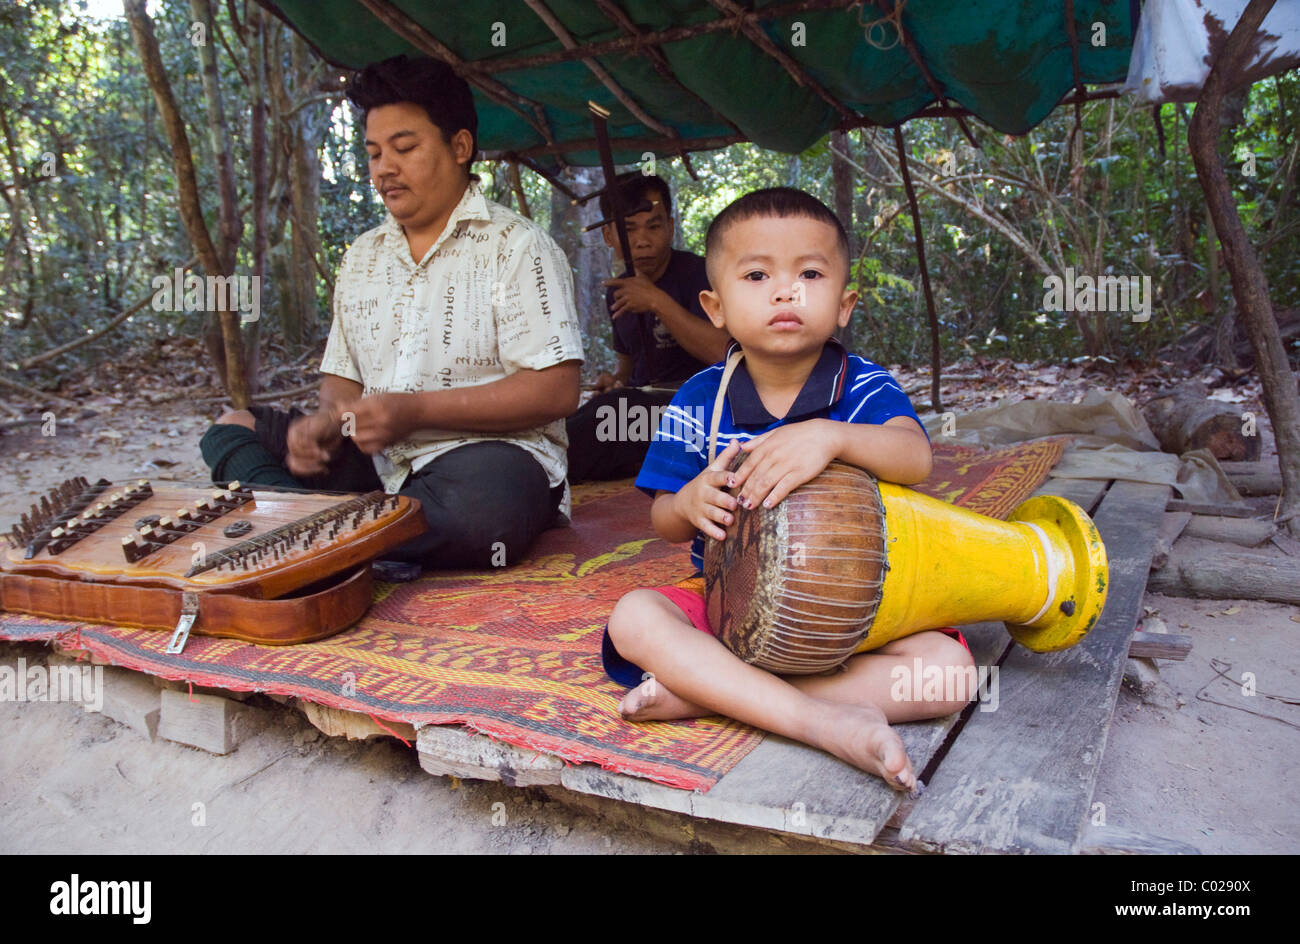 Khmer musicians in Angkor, Siem Reap, Cambodia, Indochina, Southeast Asia Stock Photo